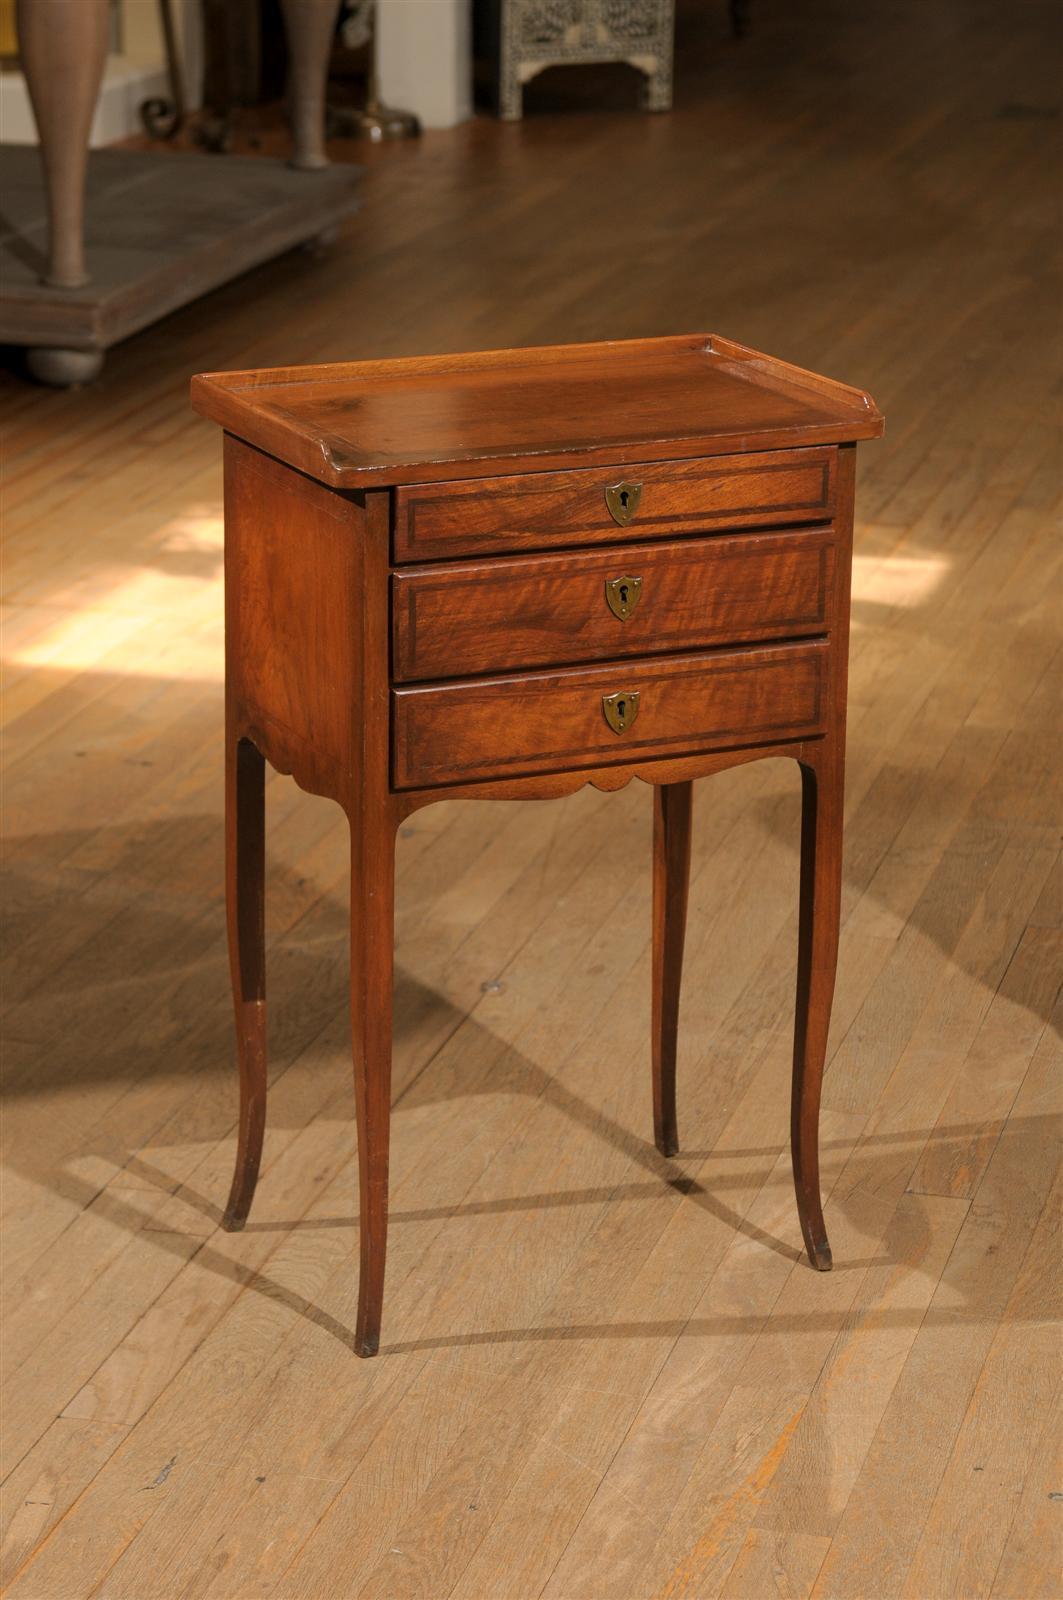 Antique Italian Neoclassical petite side table of walnut with inset inlay on the top, sides, and on the drawers.  The top has a wooden gallery that rests on a case holding three graduated drawers with brass shield escutcheons.  The table's scalloped